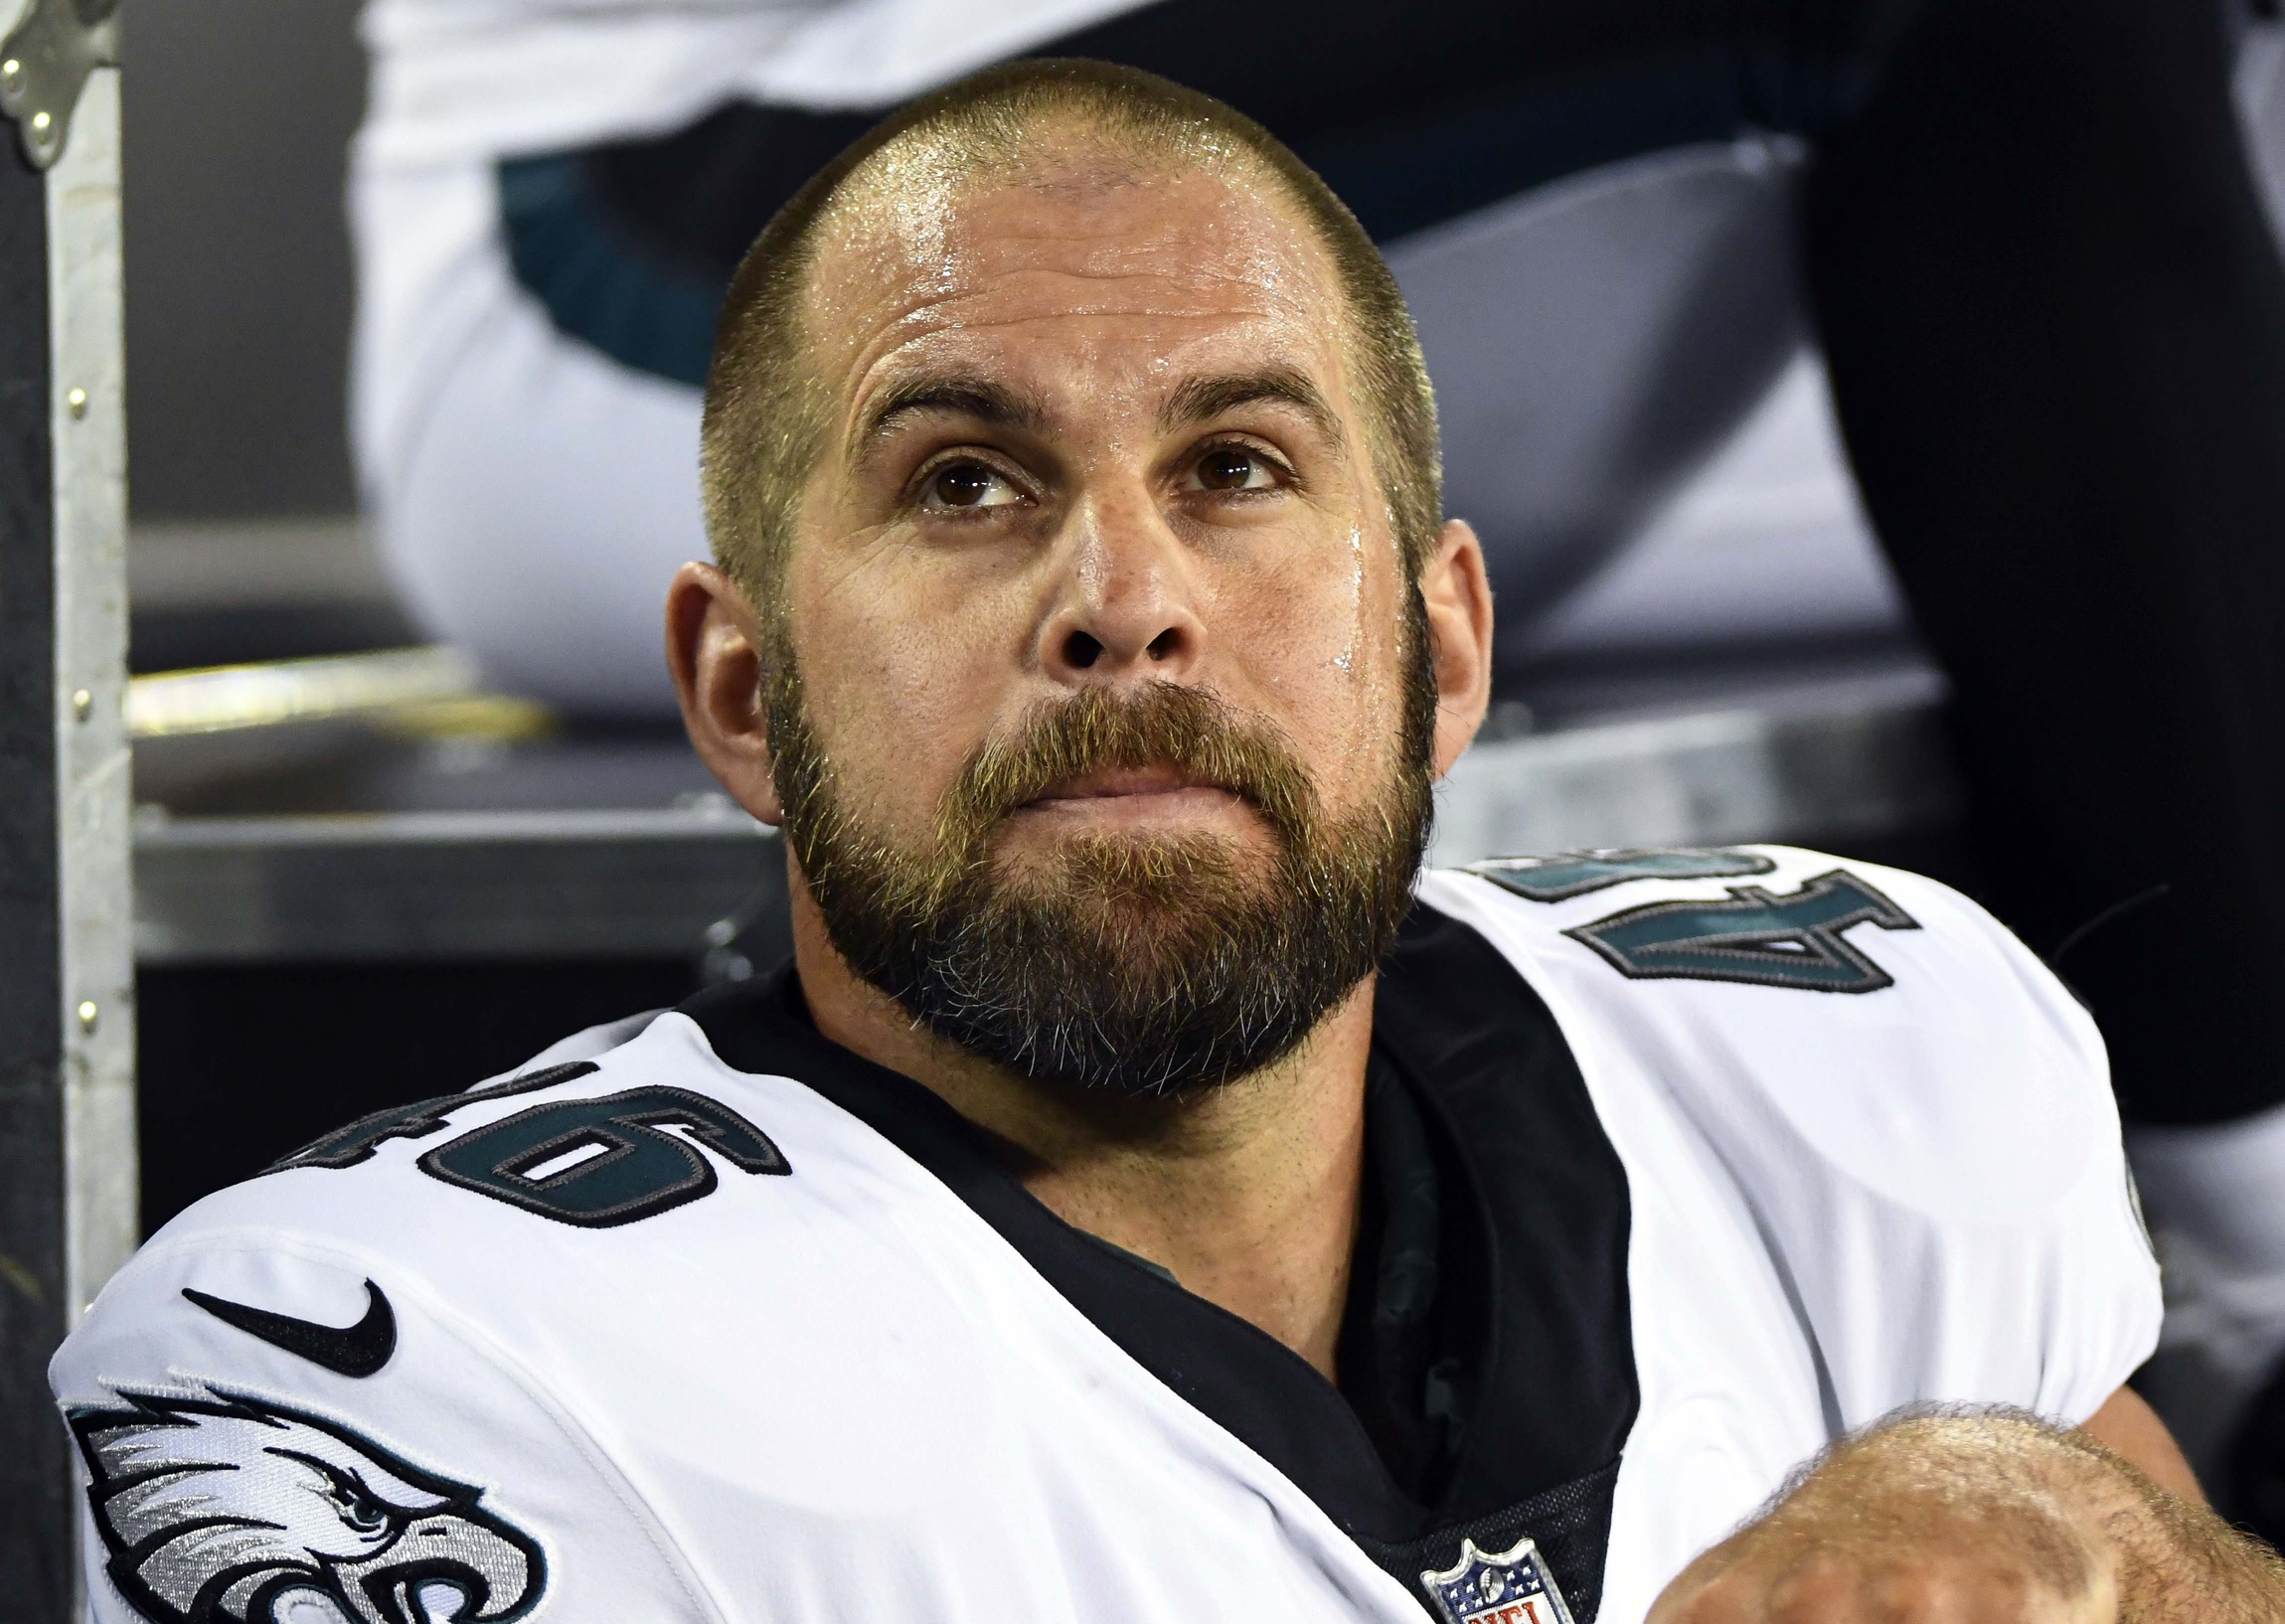 Jon Dorenbos Is Cheering Up Other Patients In the Hospital While He Recovers